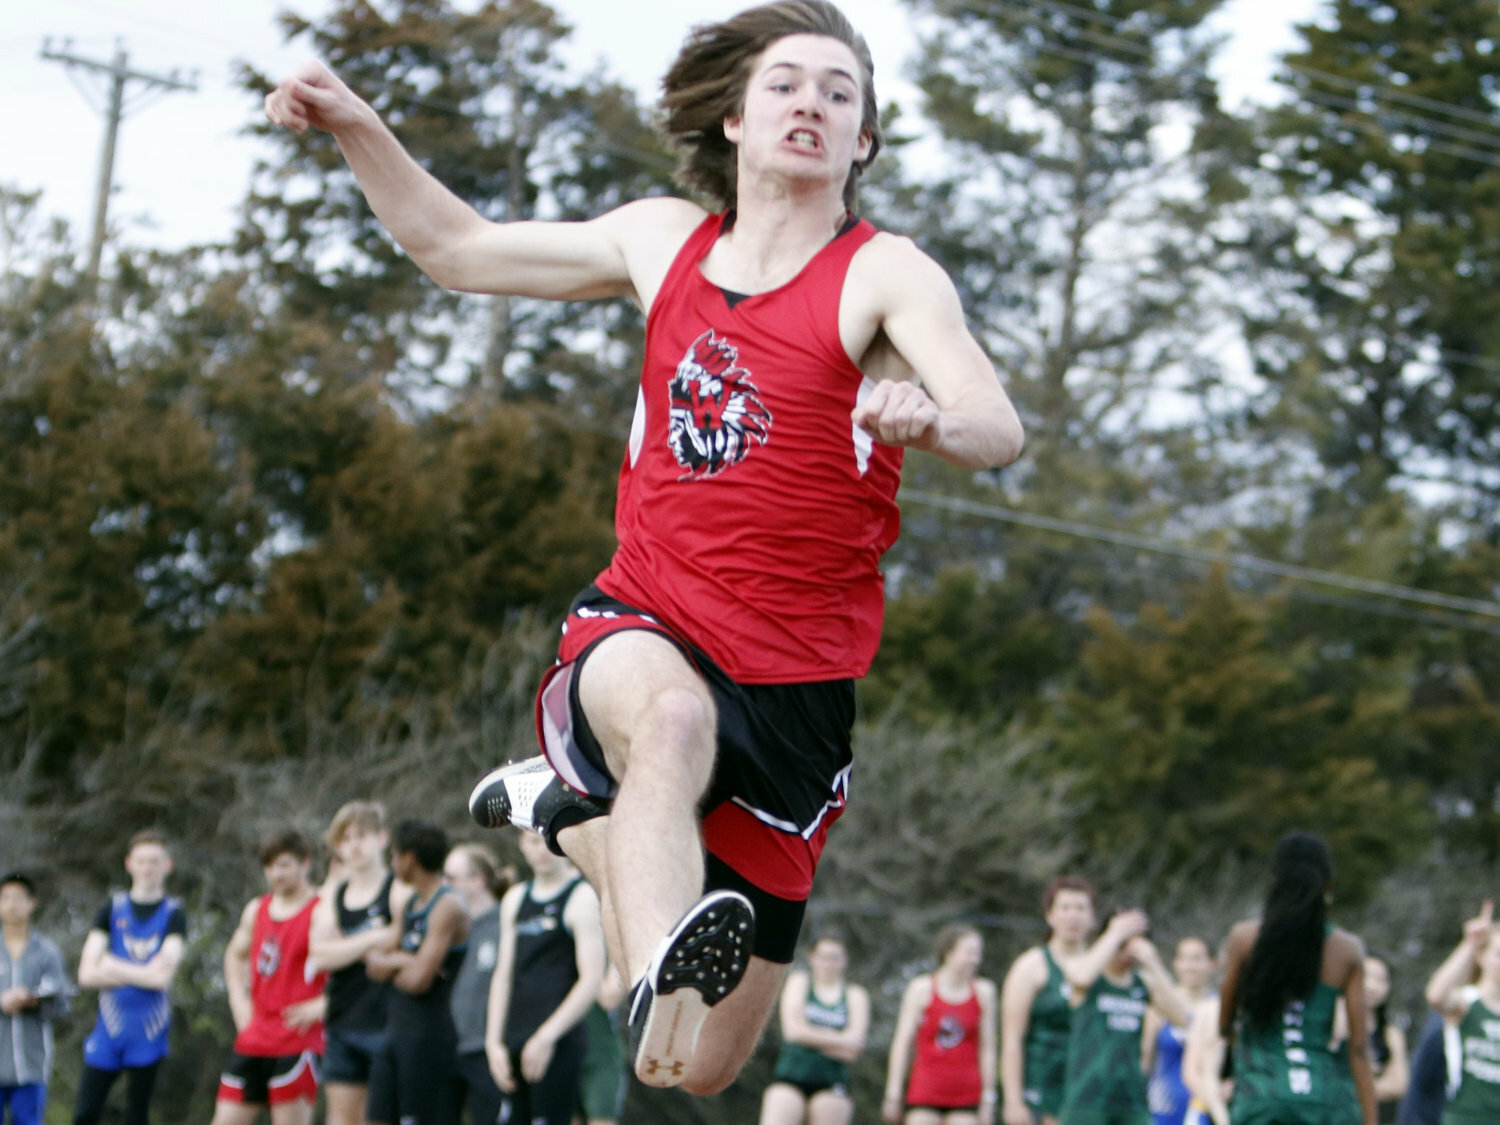 Colton Brosenne jumps into the sand pit during the long jump competition at Wright City this past season.